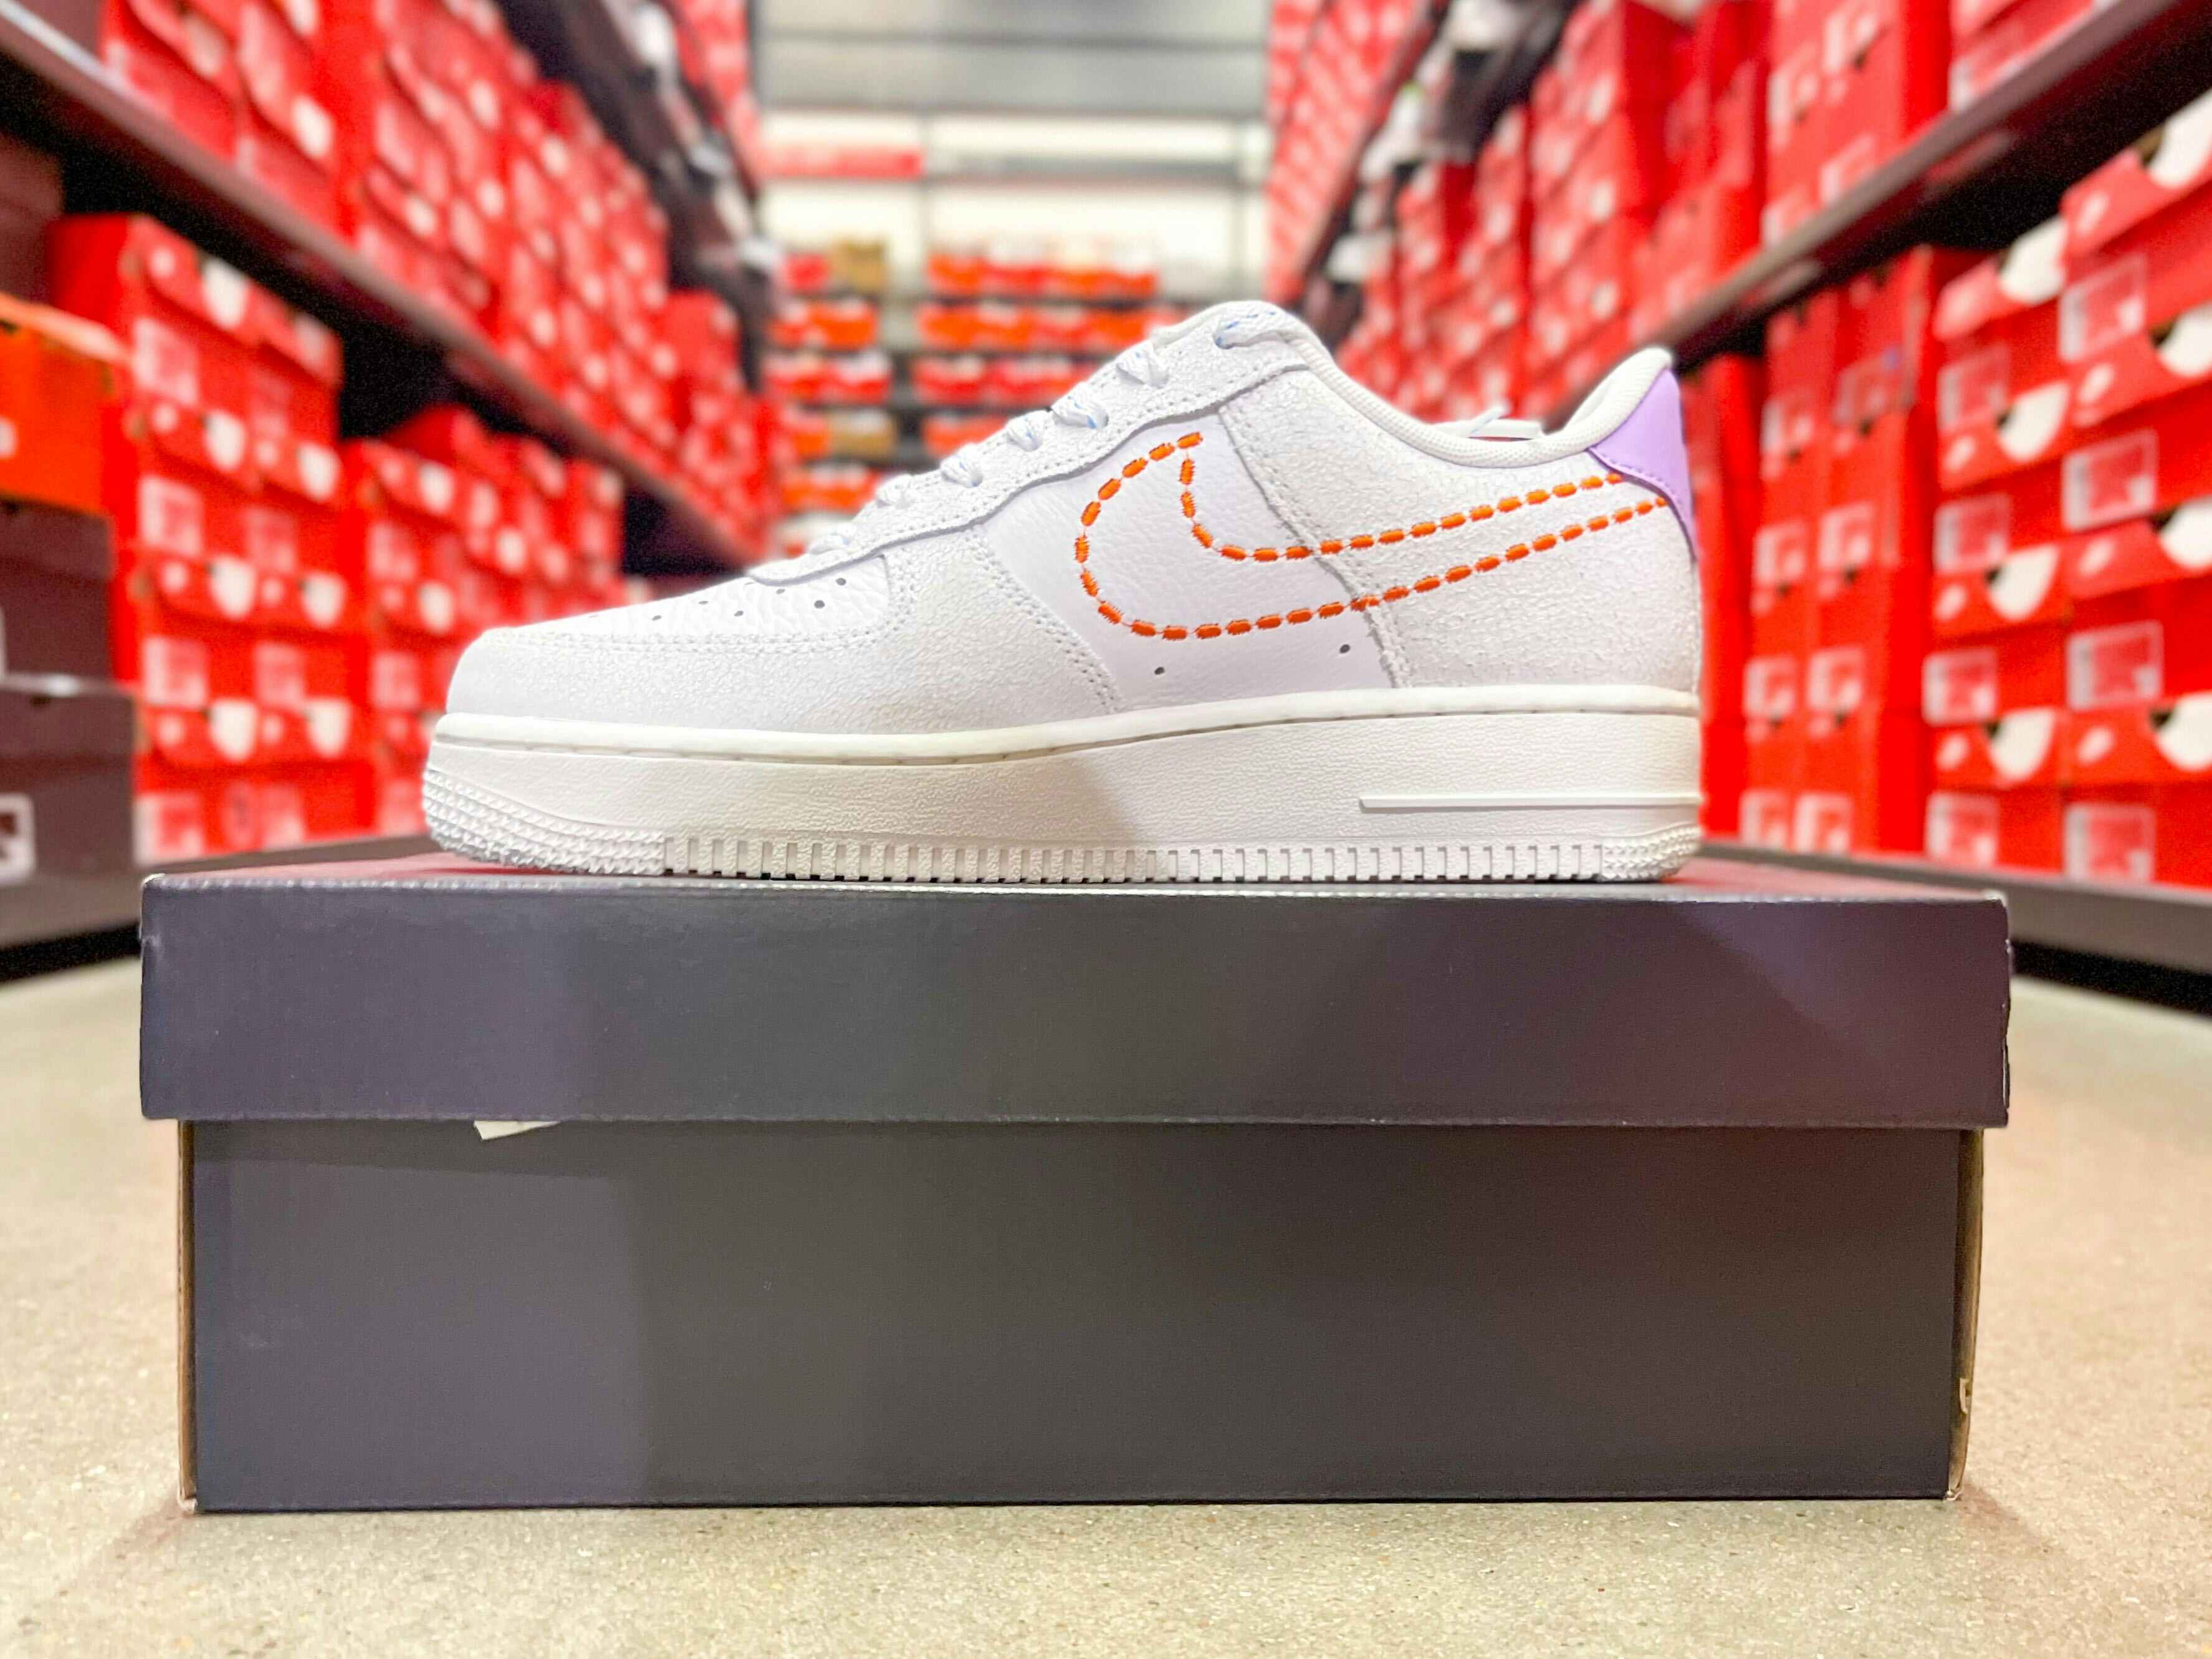 Nike Summer Sale on Shoes: $56 Jordans, $66 Air Force 1s, and More